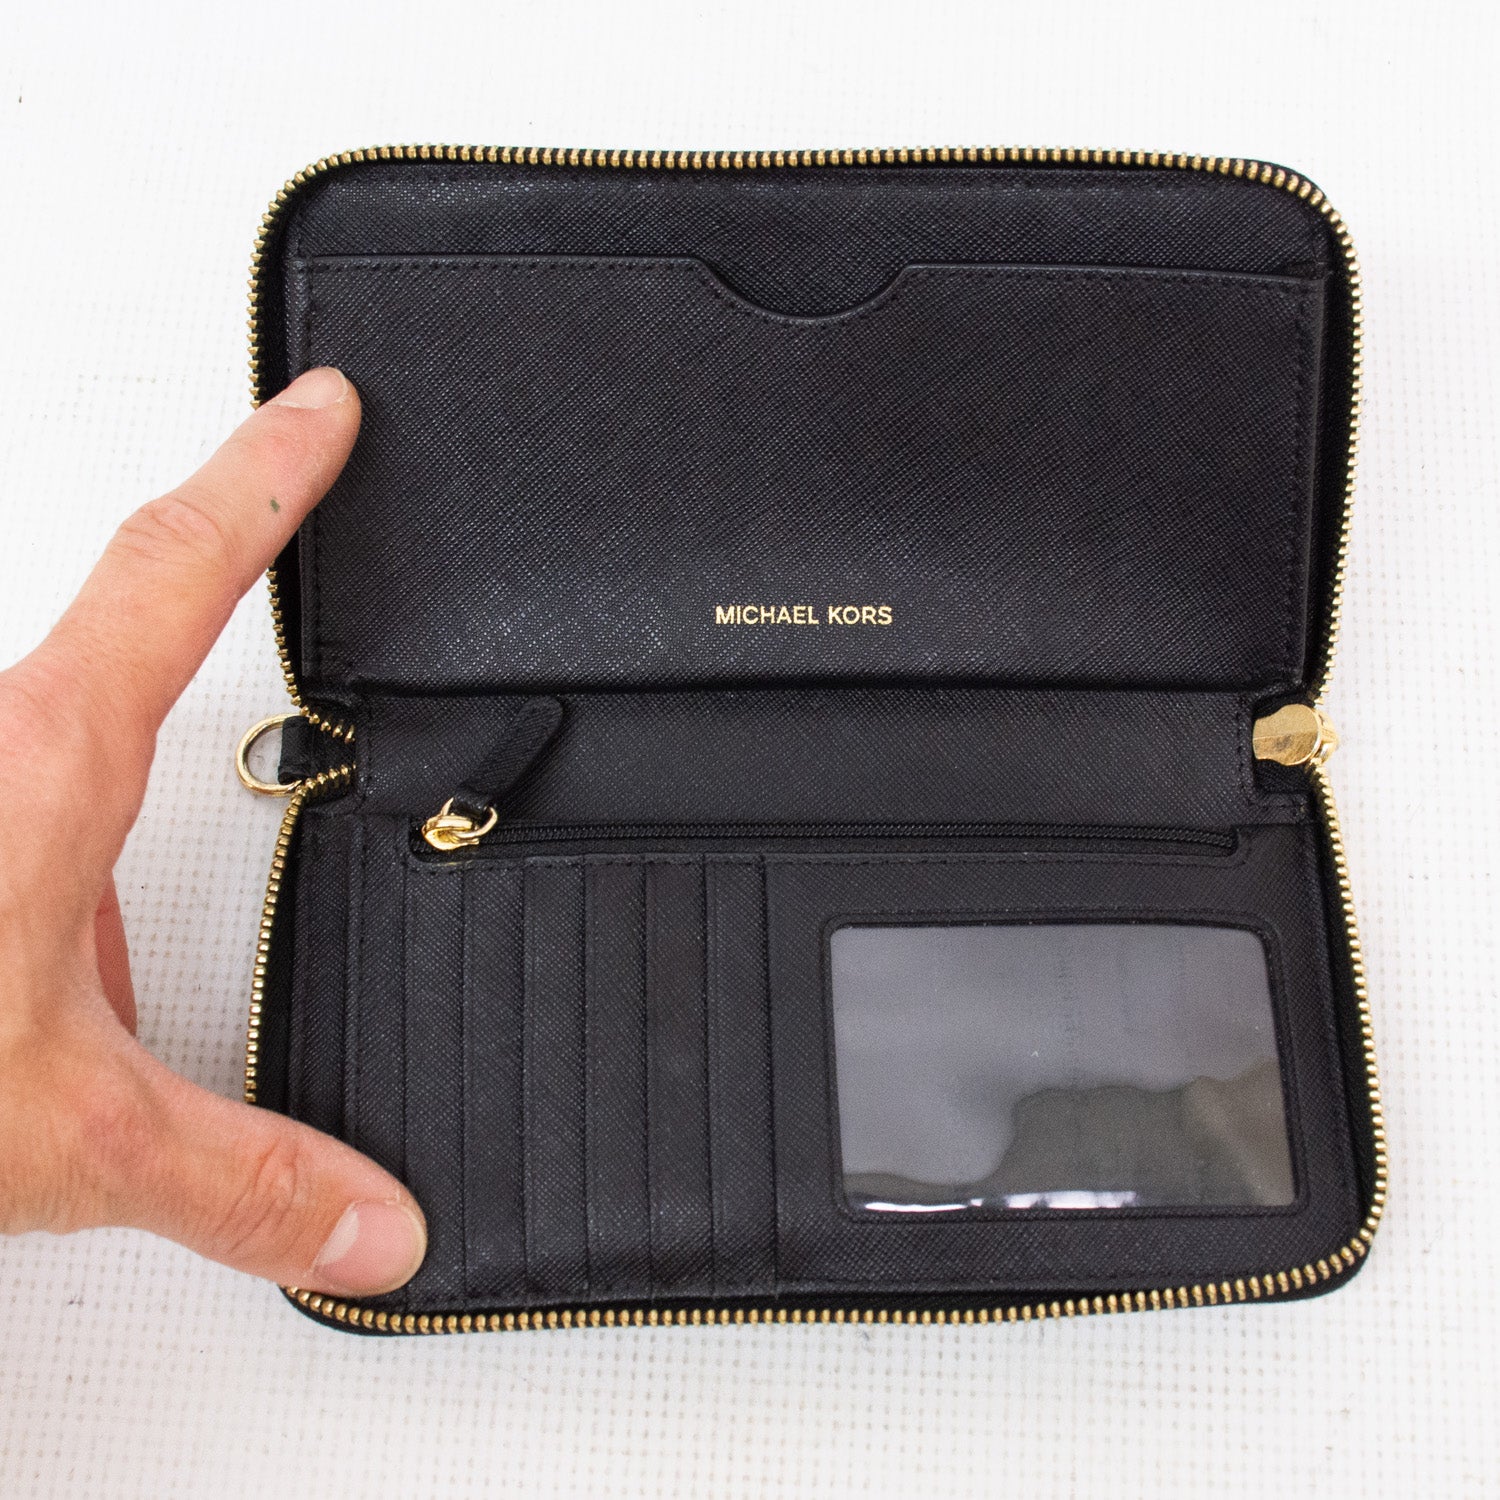 Michael Kors Large Black Saffiano Leather Continental Zip Around Cell Phone Wallet